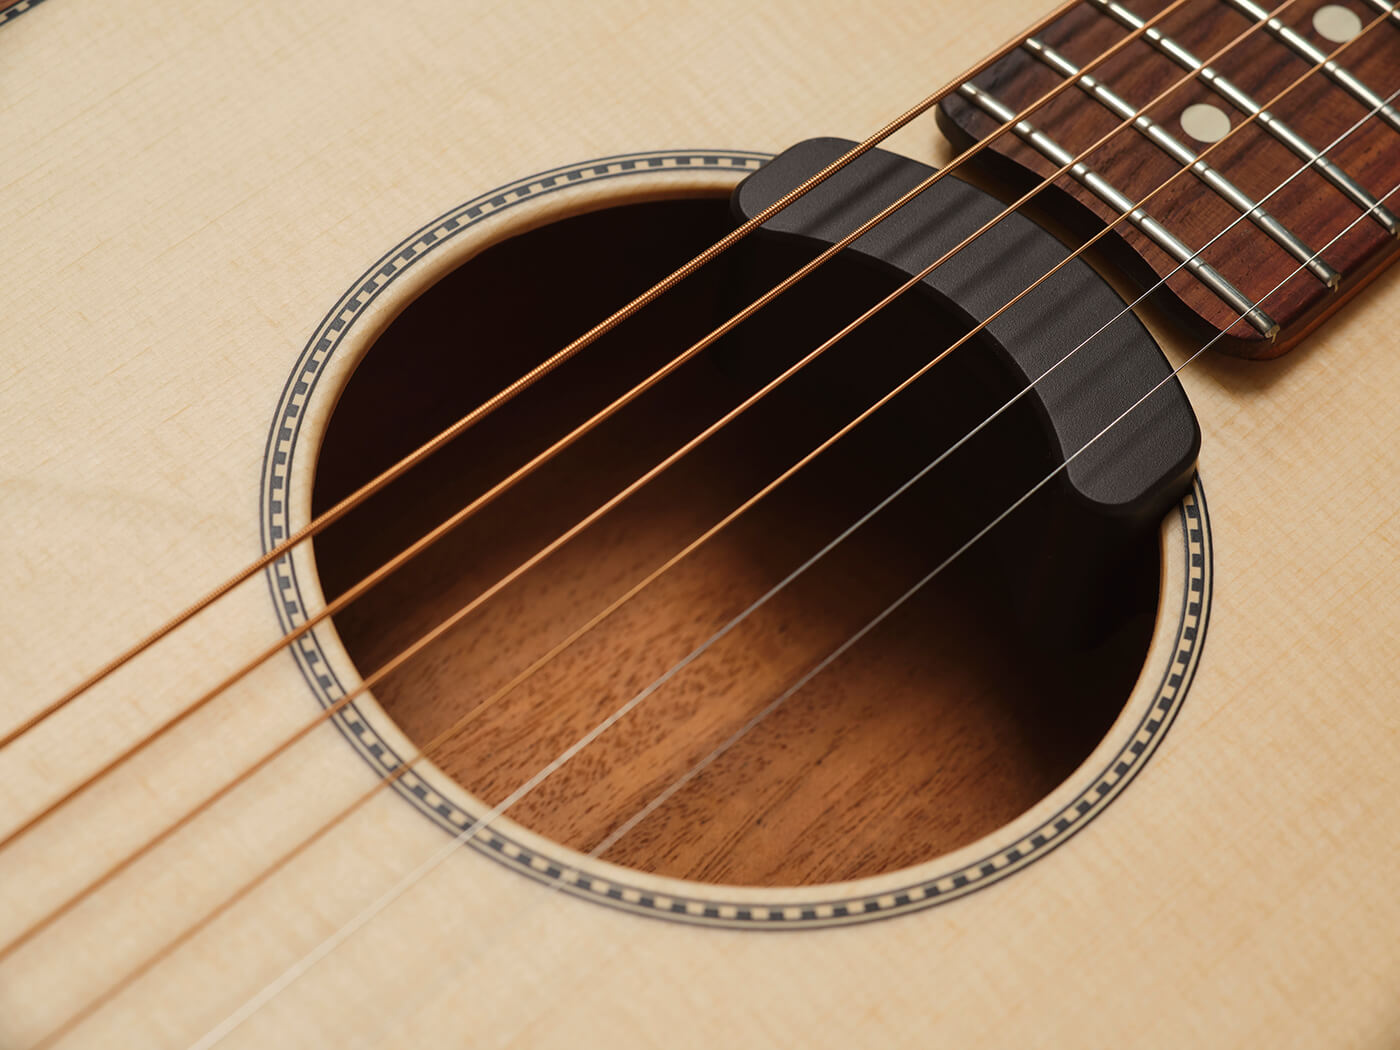 Fender Highway Series Dreadnought soundhole, photo by Adam Gasson